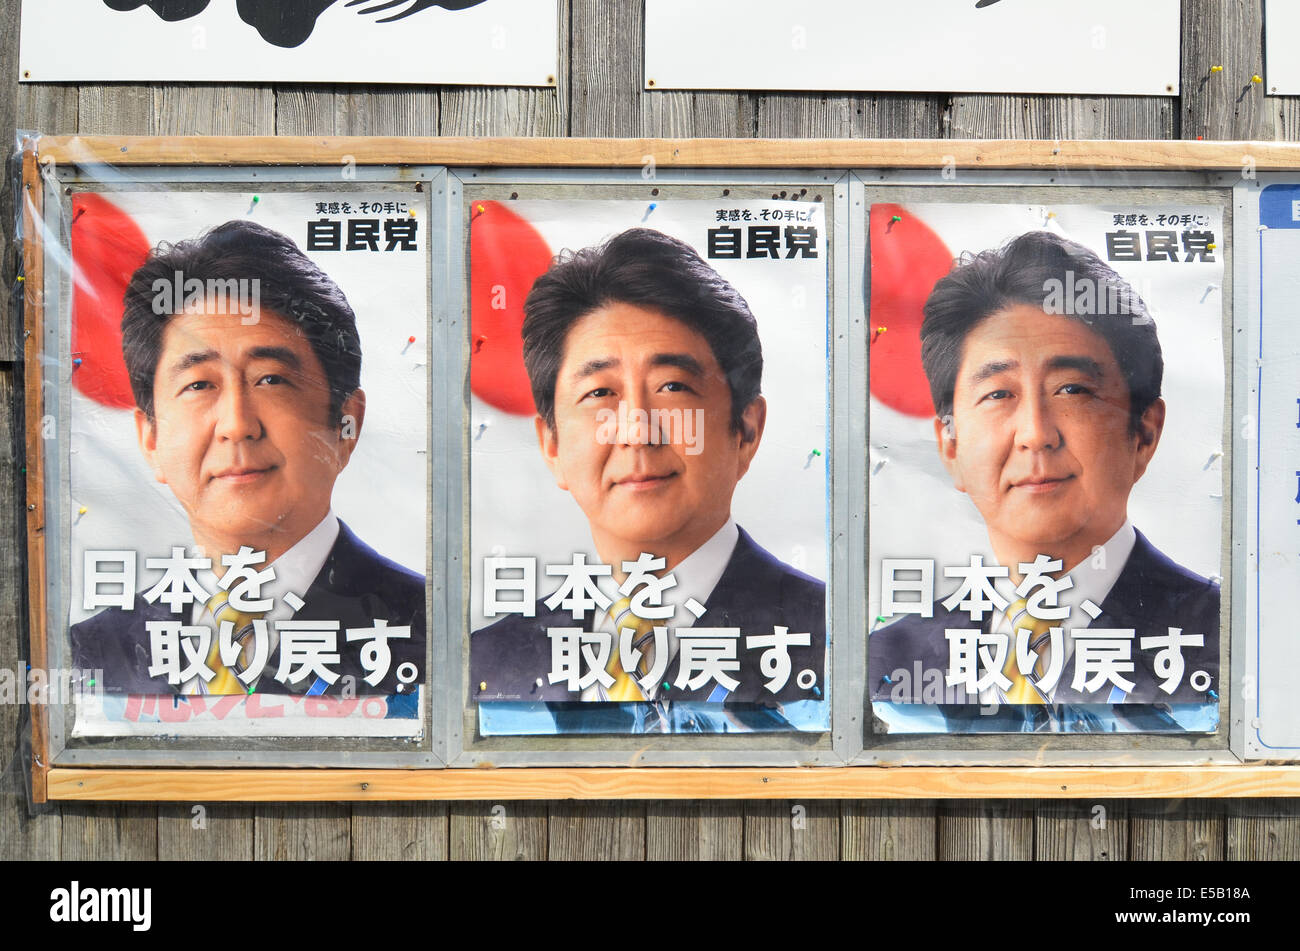 Eection posters showing Japanese prime minister Shinzo Abe. Stock Photo